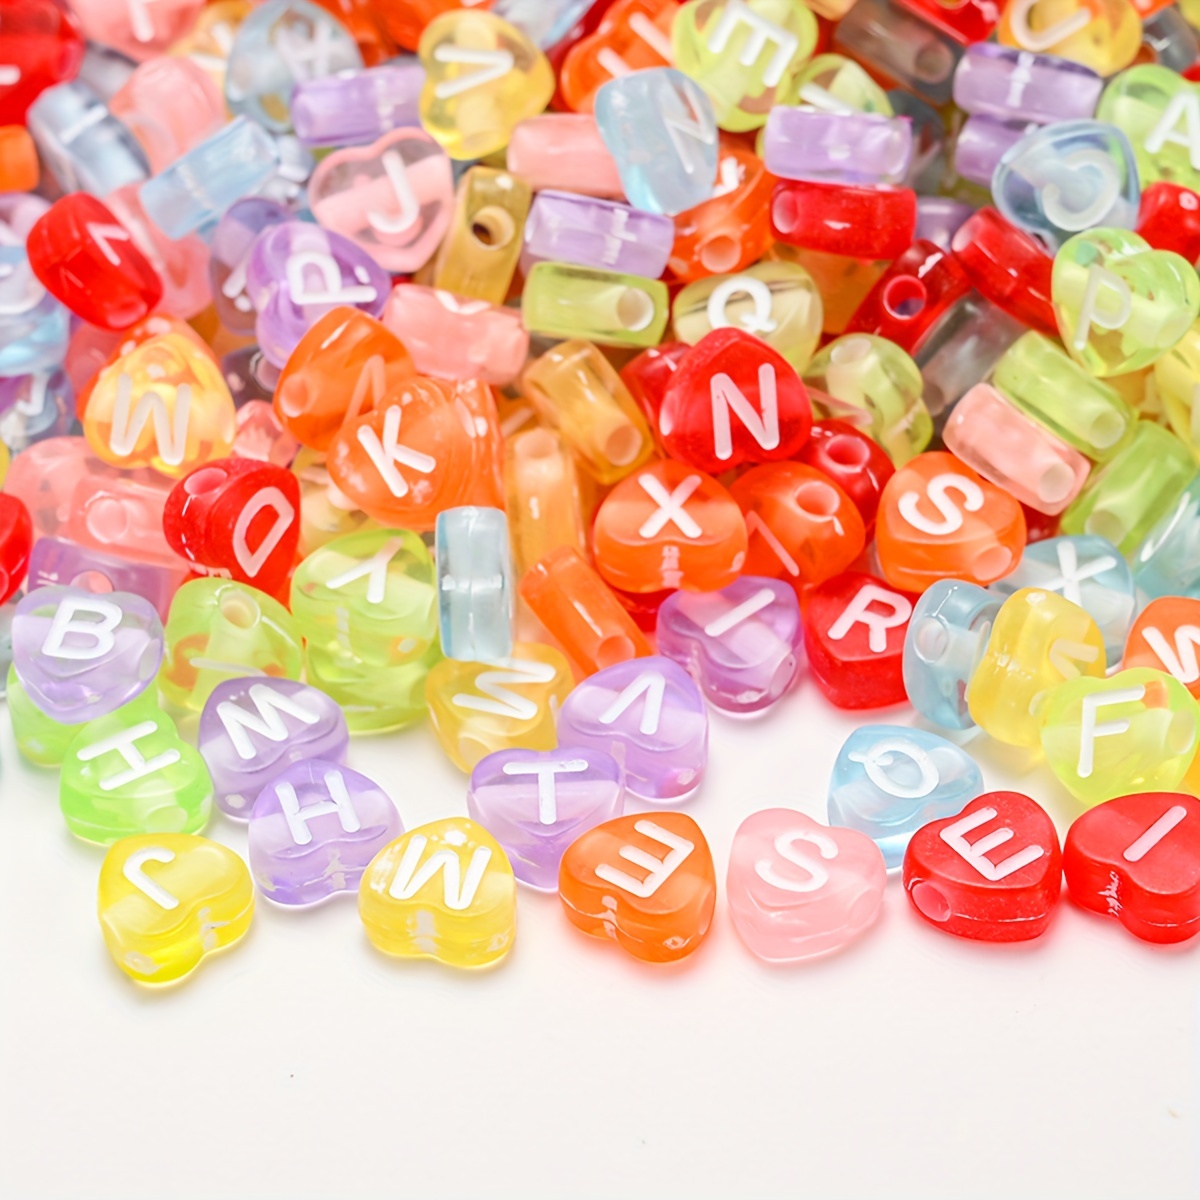 

500pcs/lot 7mm Heart Shape Acrylic Colorful Letter Beads Loose Spacer Beads For Jewelry Making Diy Bracelet Necklace Earrings Handicrafts Small Business Supplies